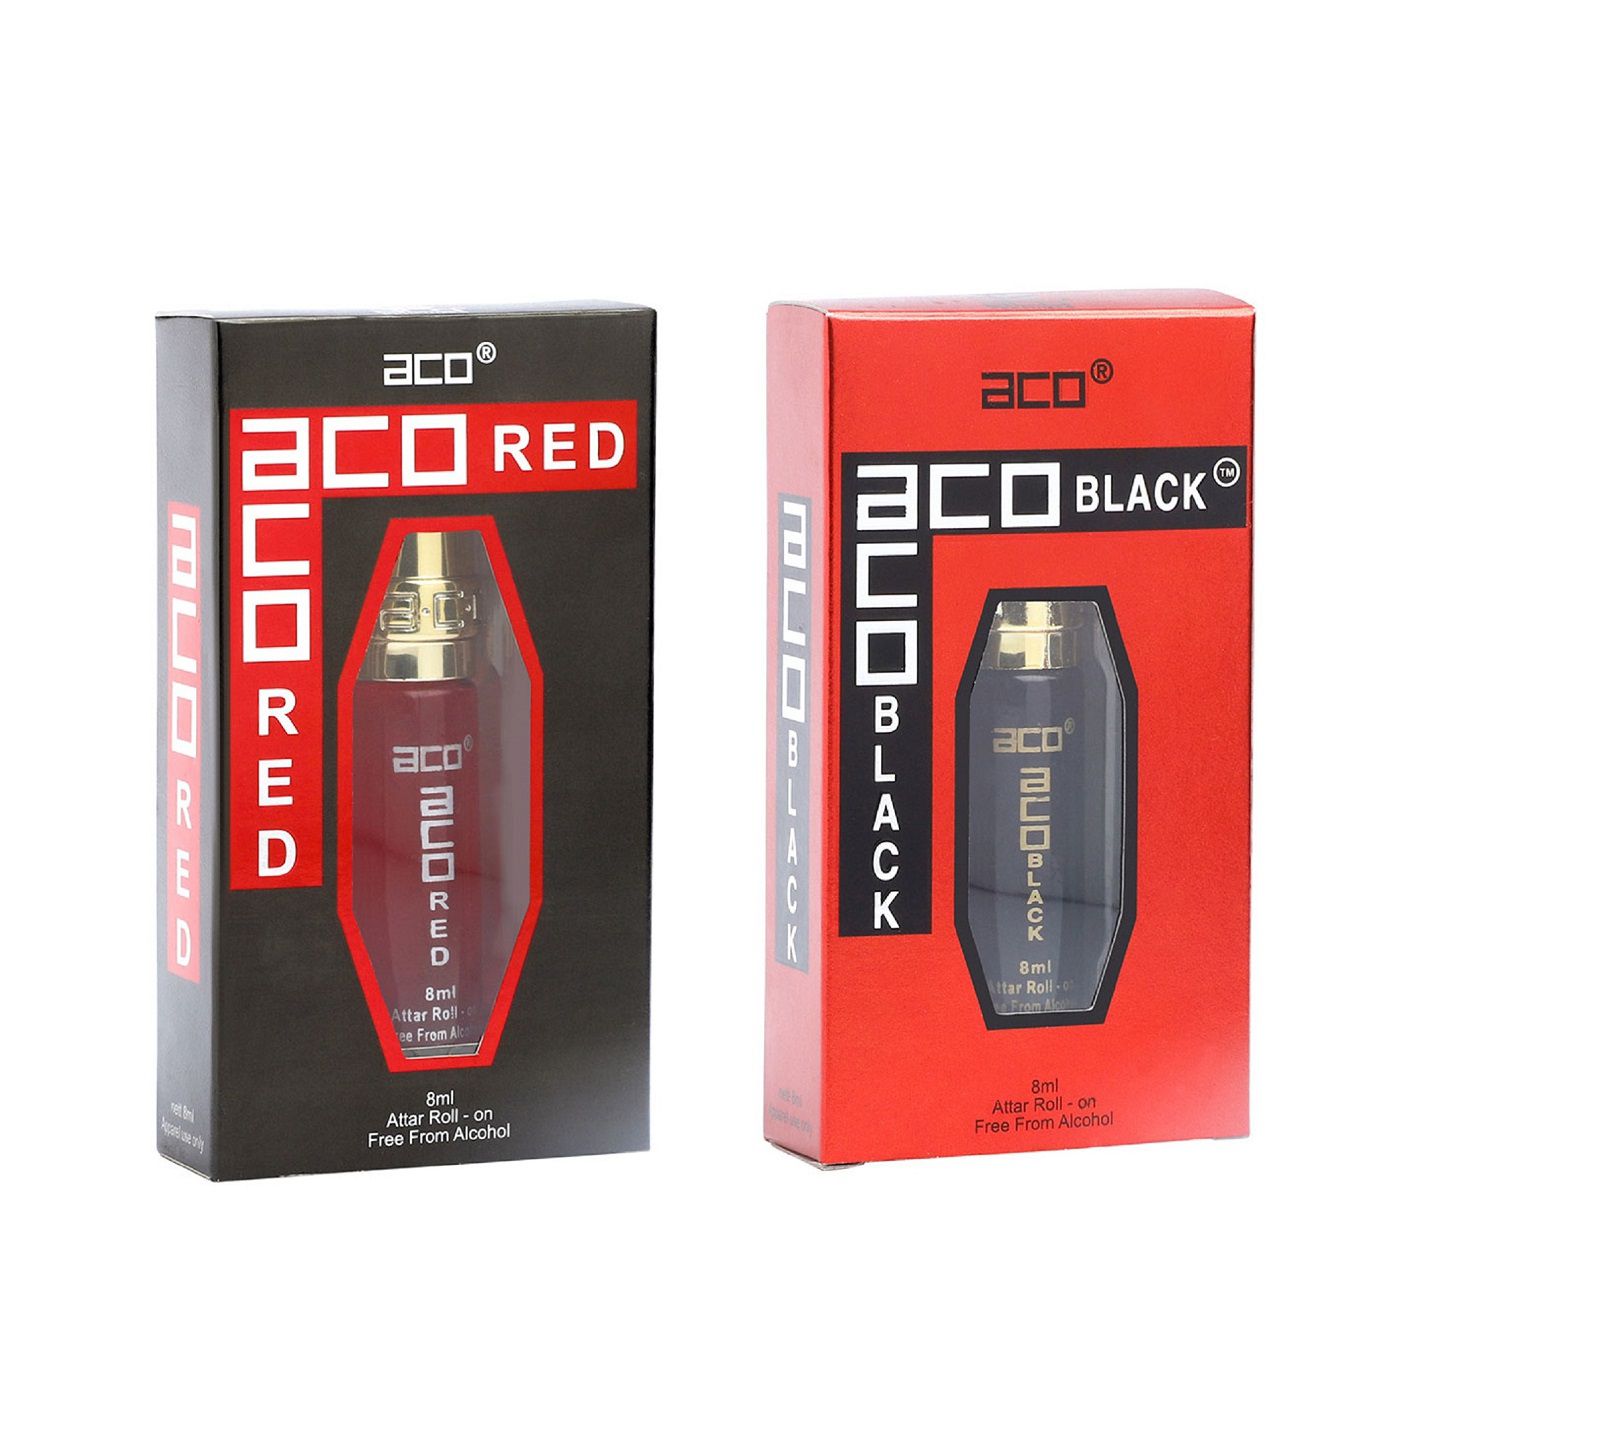     			aco perfumes ACO RED & ACO BLACK Concentrated  Attar Roll On 8ml COMBO SET